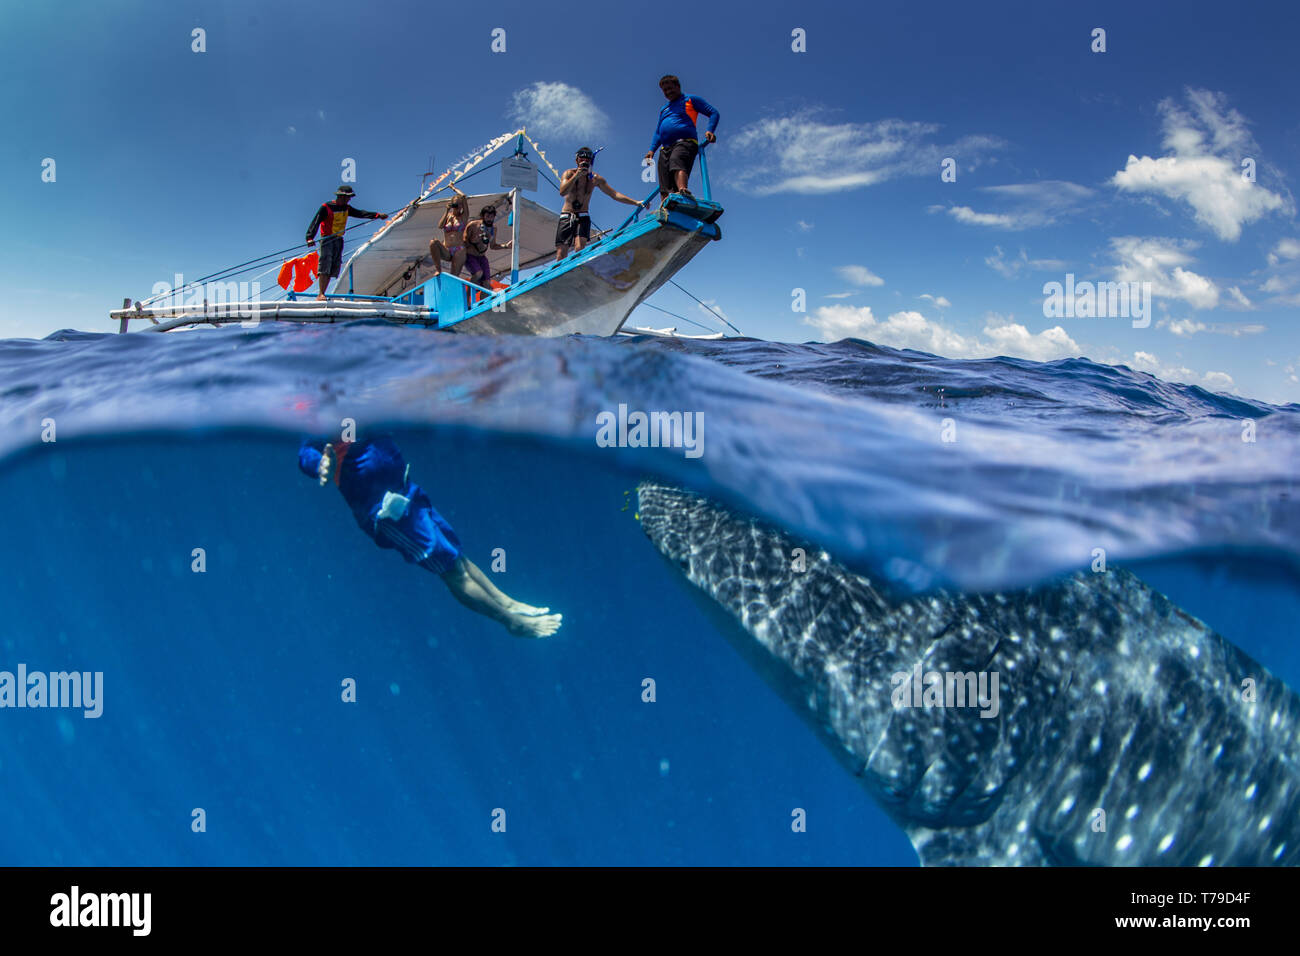 Over under photo of a whale shark (Rhincondon typus) swimming beneath a banca tour boat in Honda Bay, Palawan, the Philippines. Stock Photo